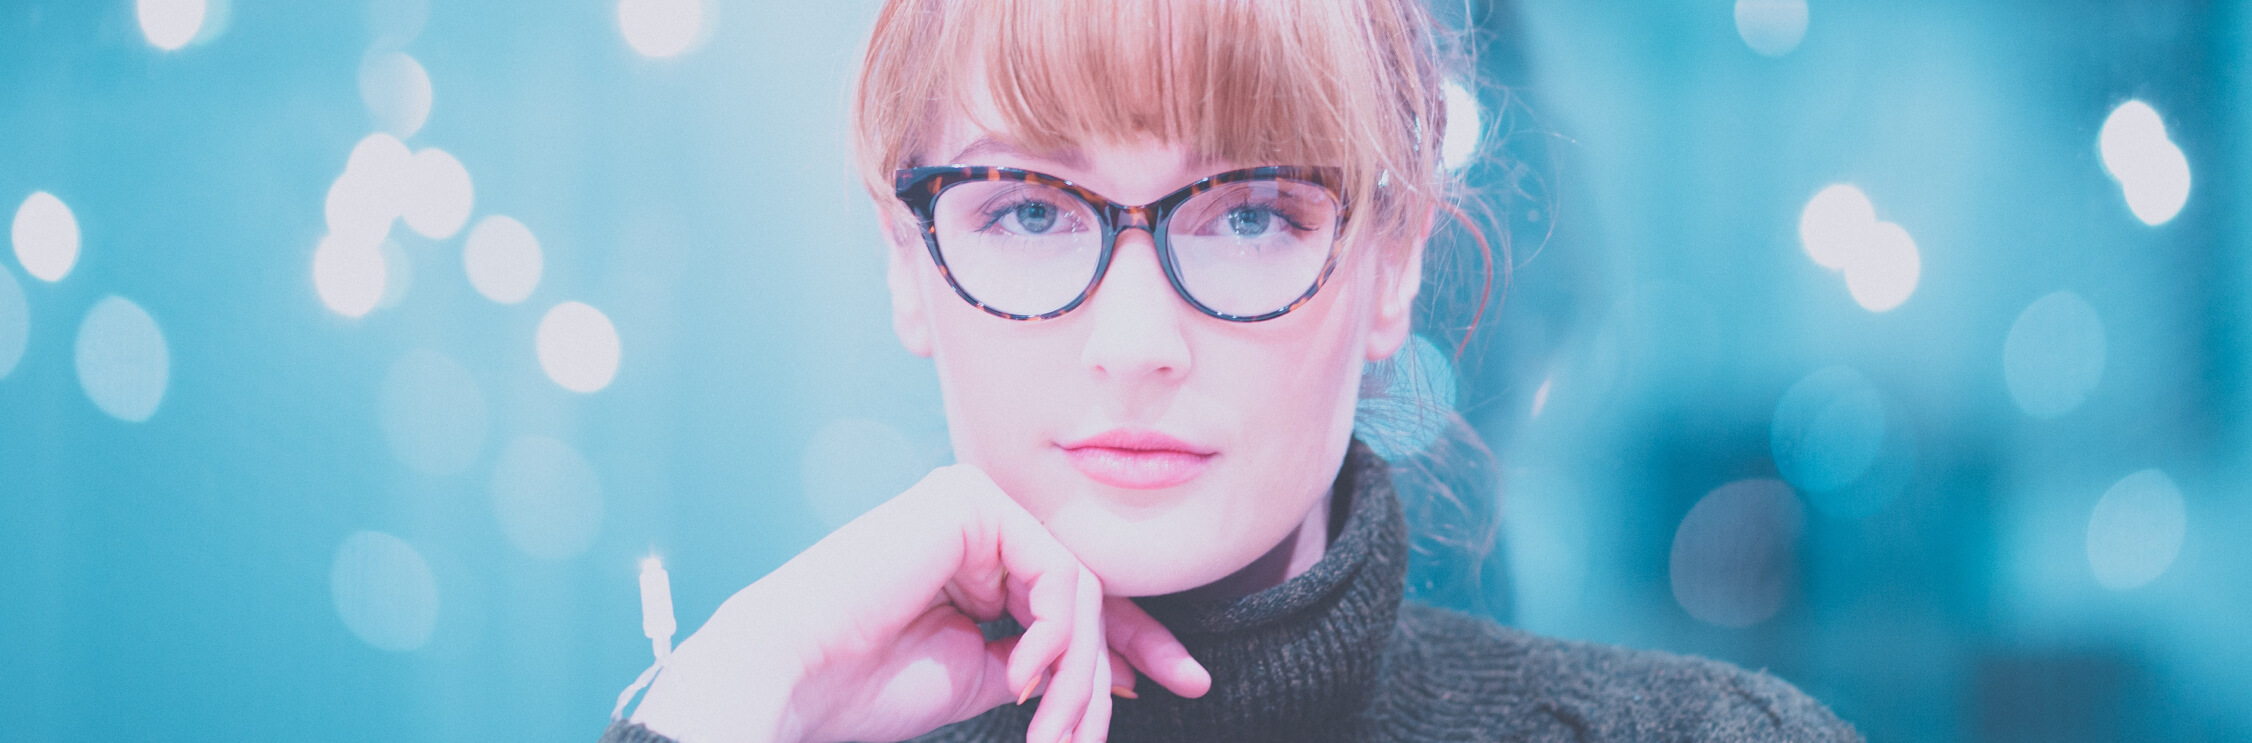 Head and shoulders image of a young woman with red hair against a blue background wearing a green turtle-neck jumper and large tortoiseshell cats-eye glasses.